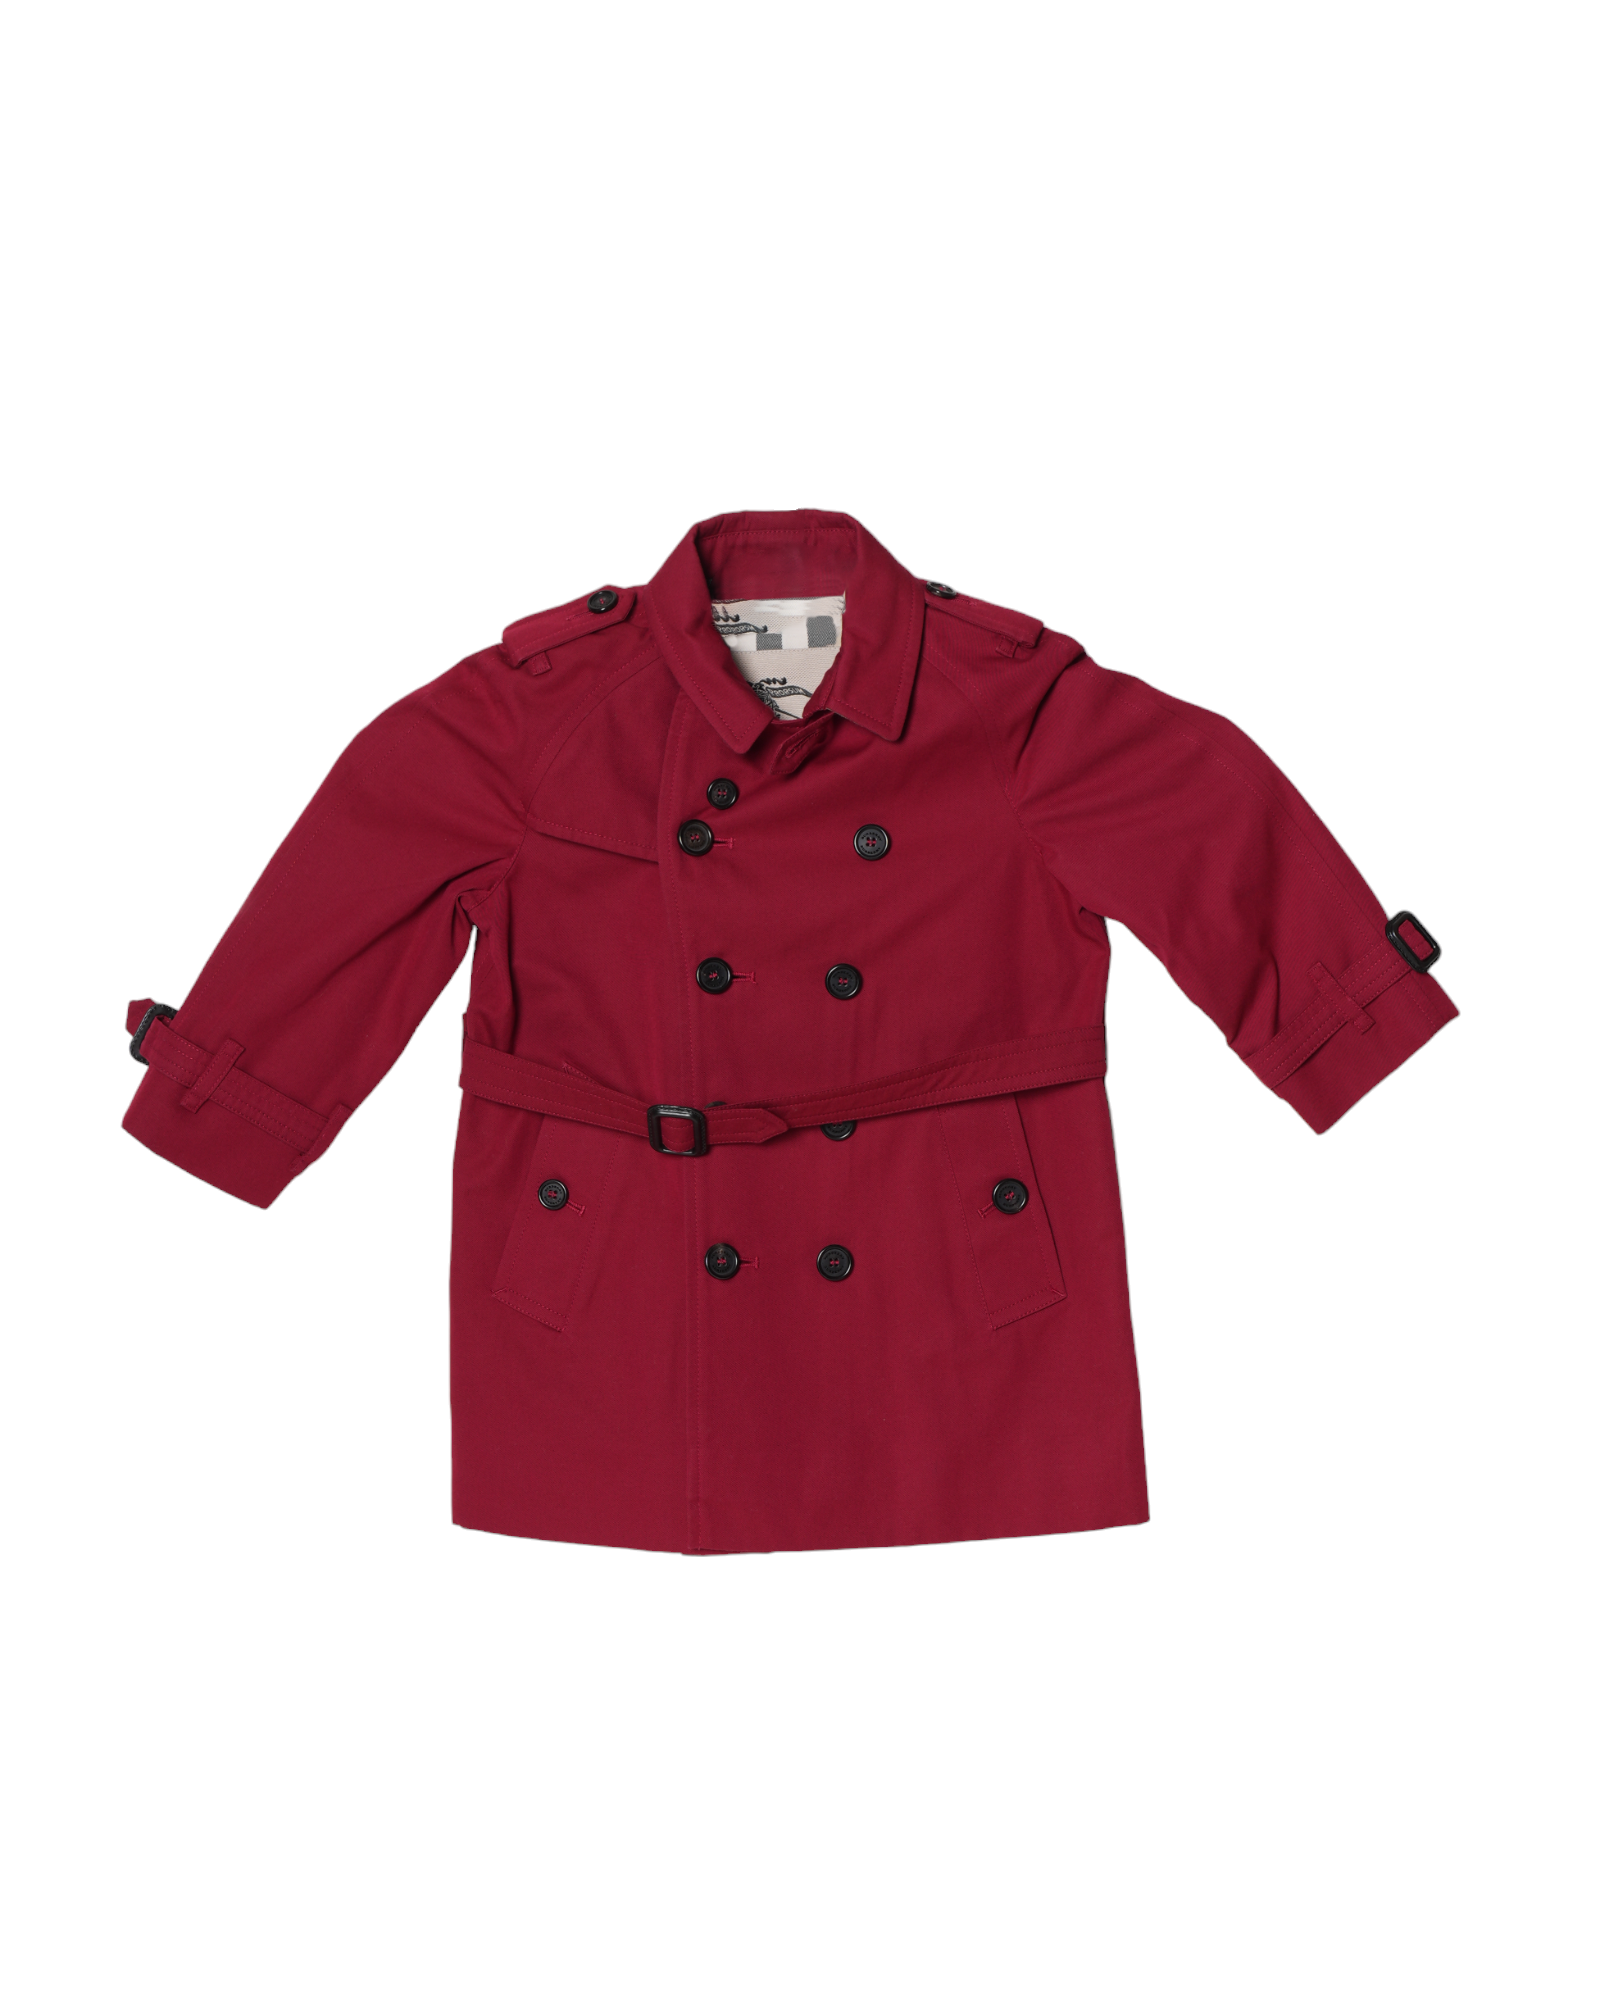 New Burberry Red Trench